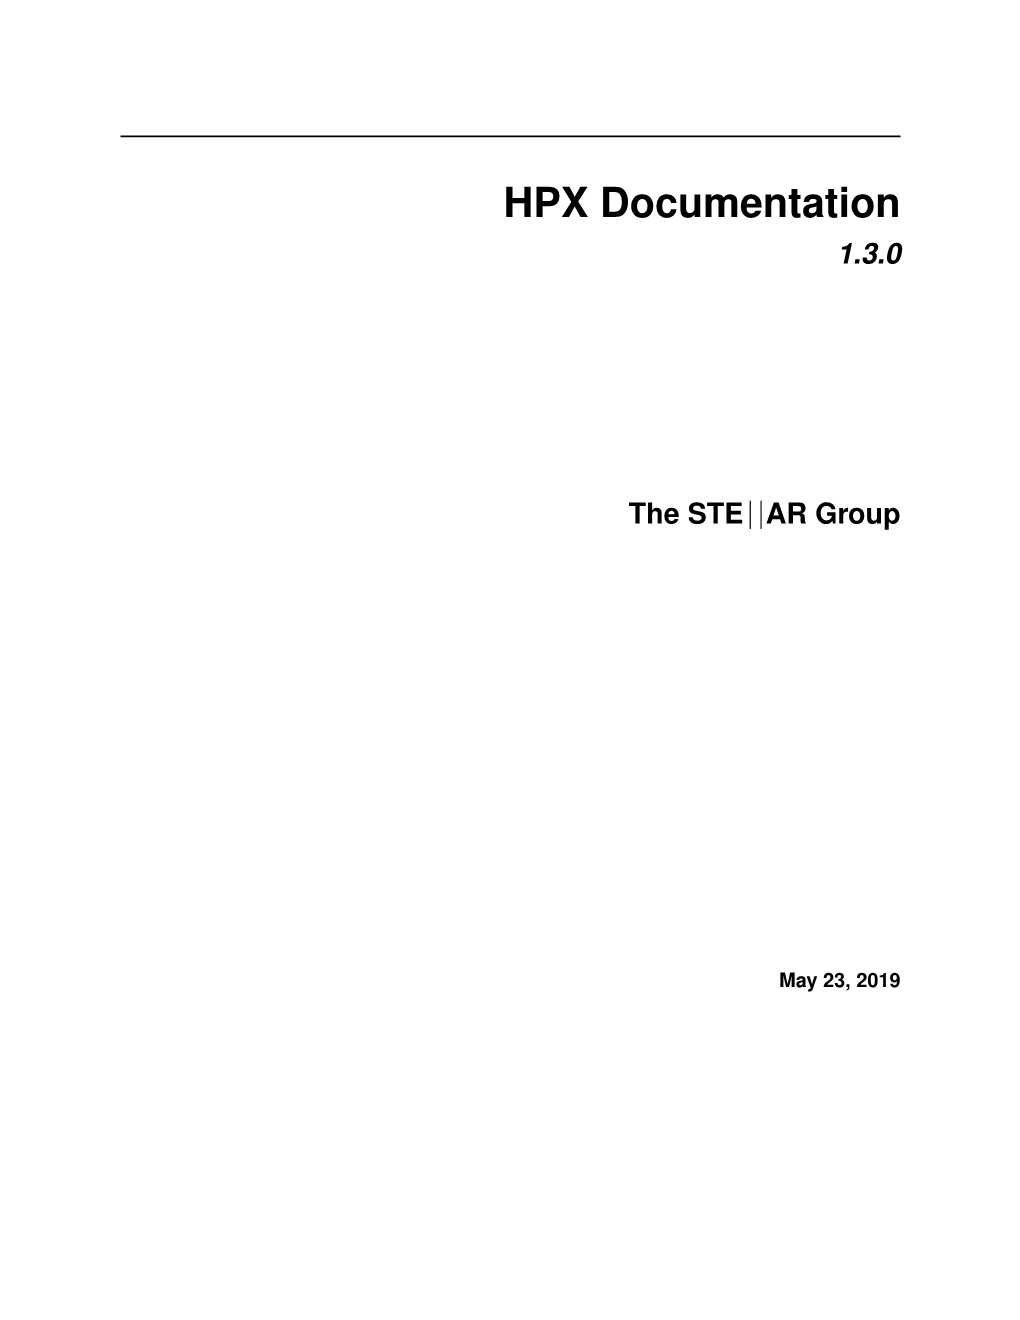 HPX Documentation 1.3.0 The